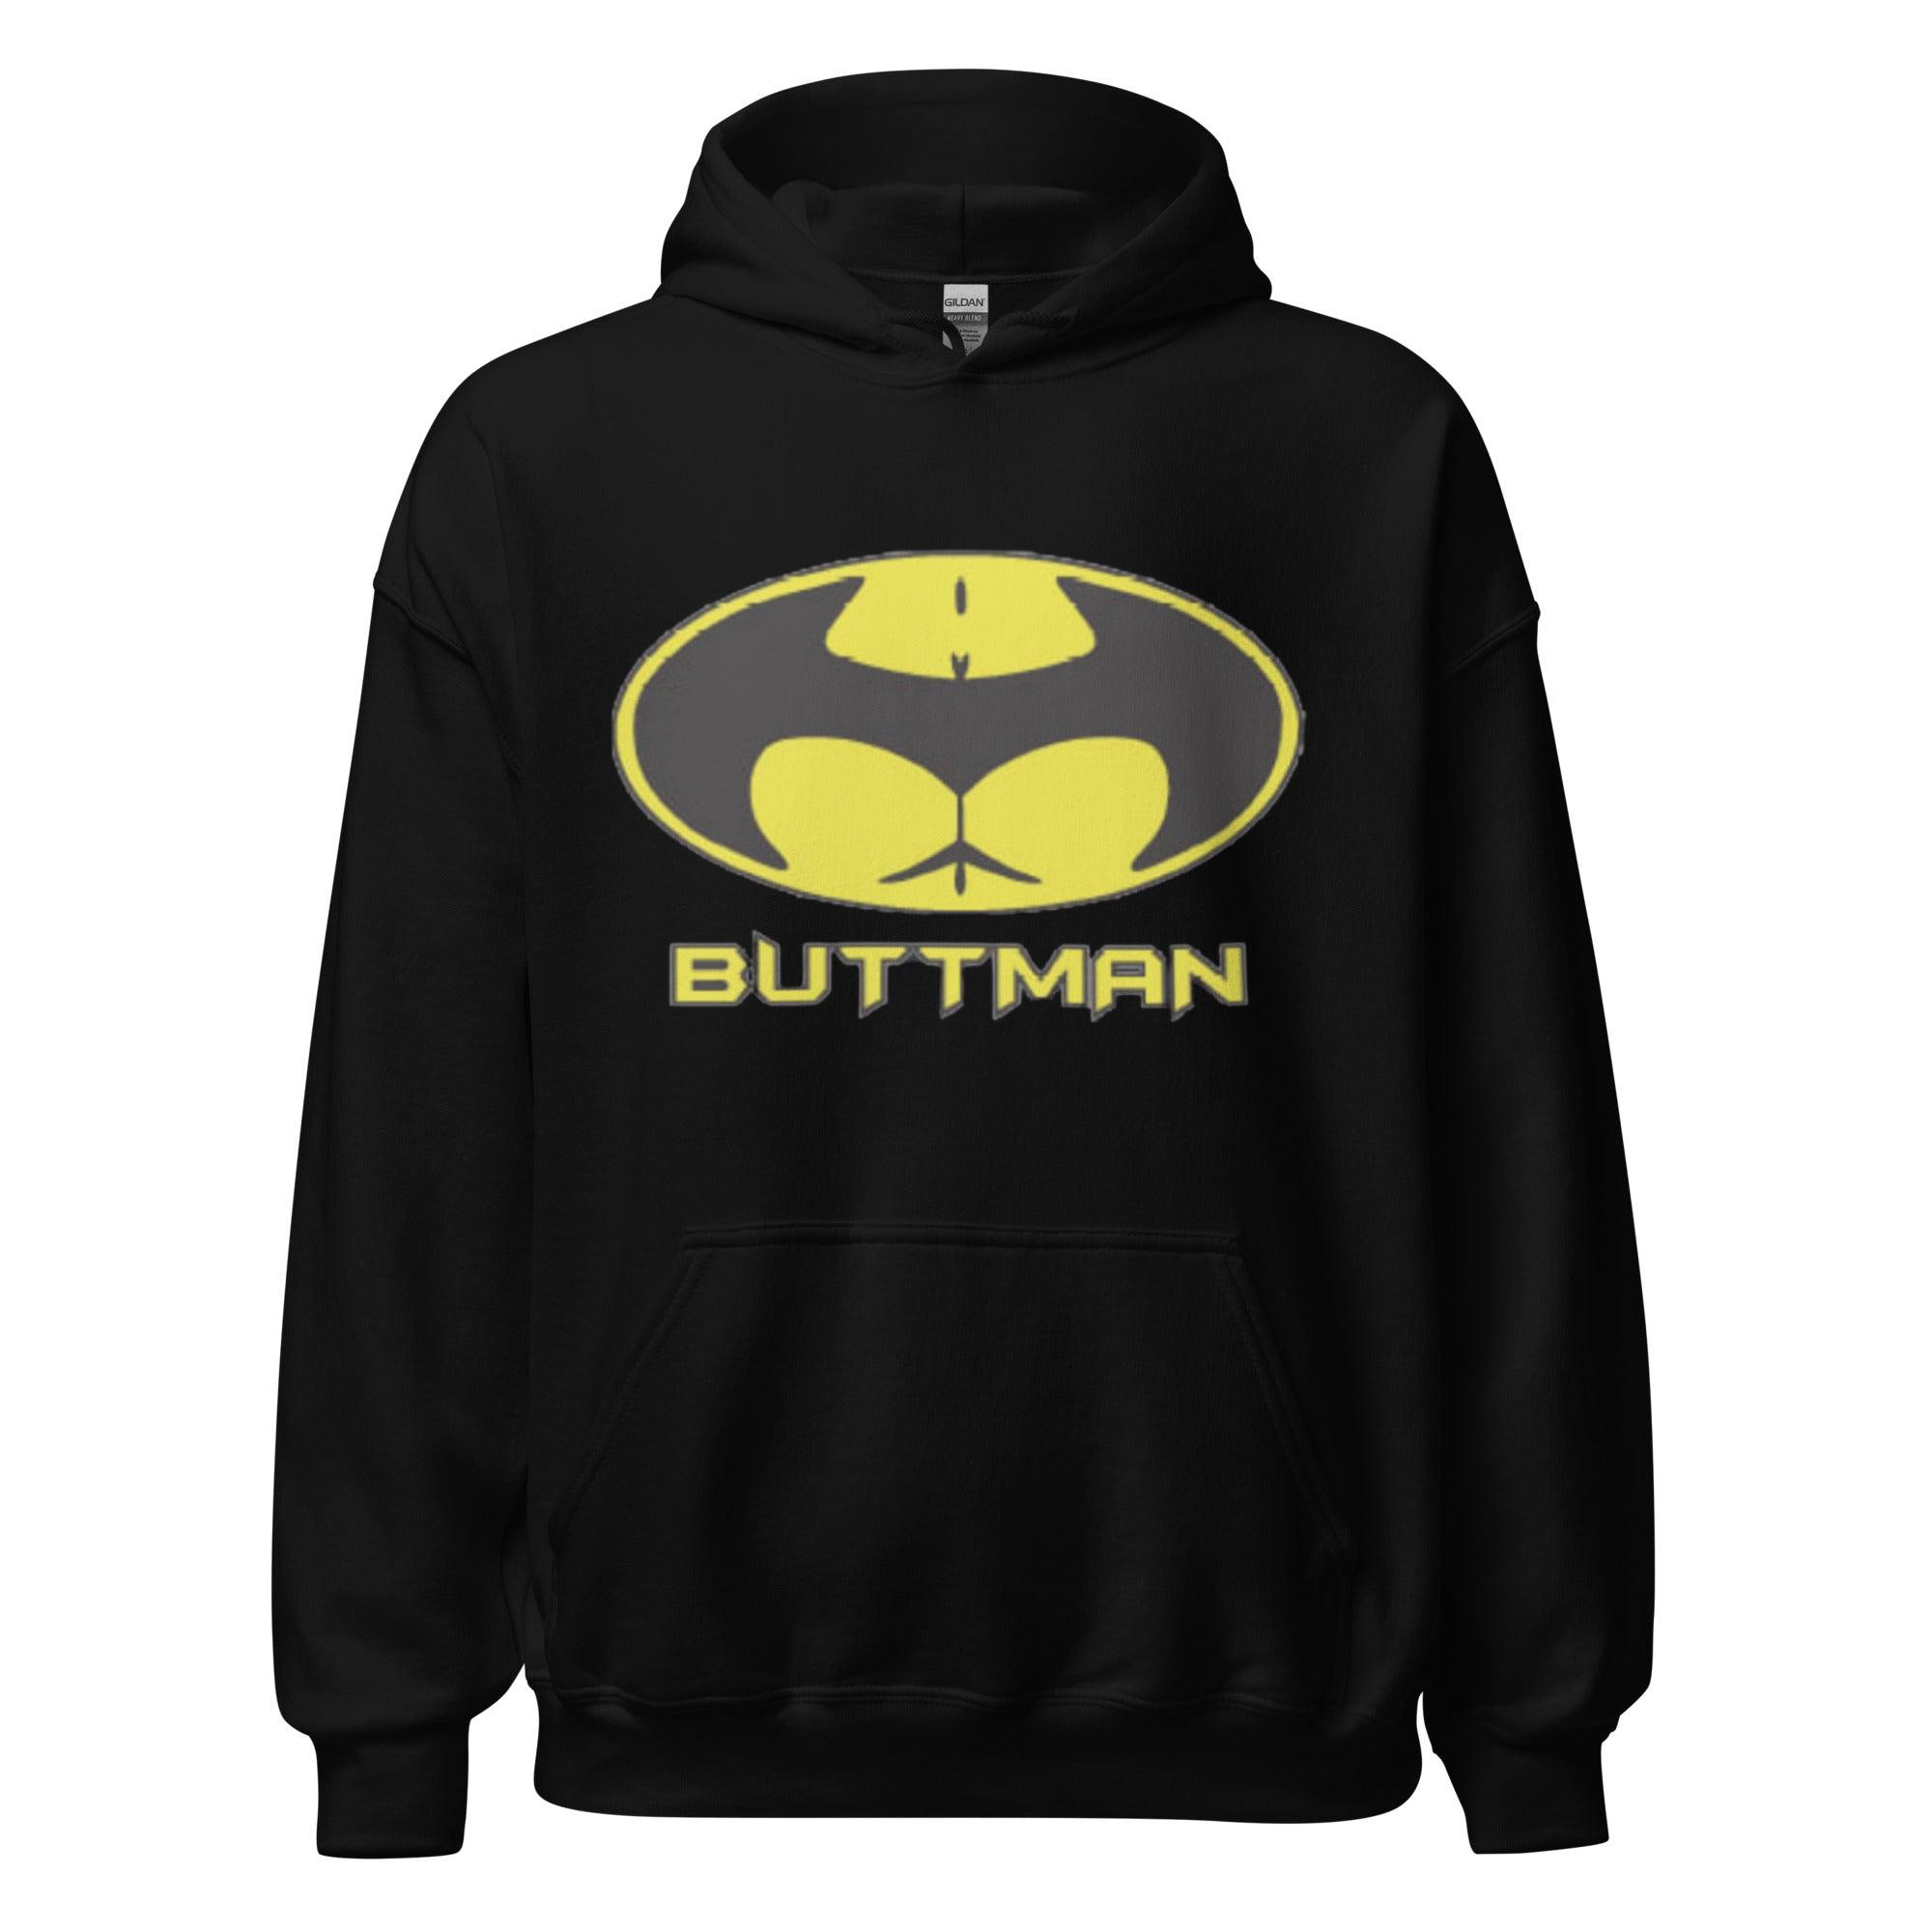 Cotton Blend Hoodie Buttman Soft Style Mid Weight Pullover